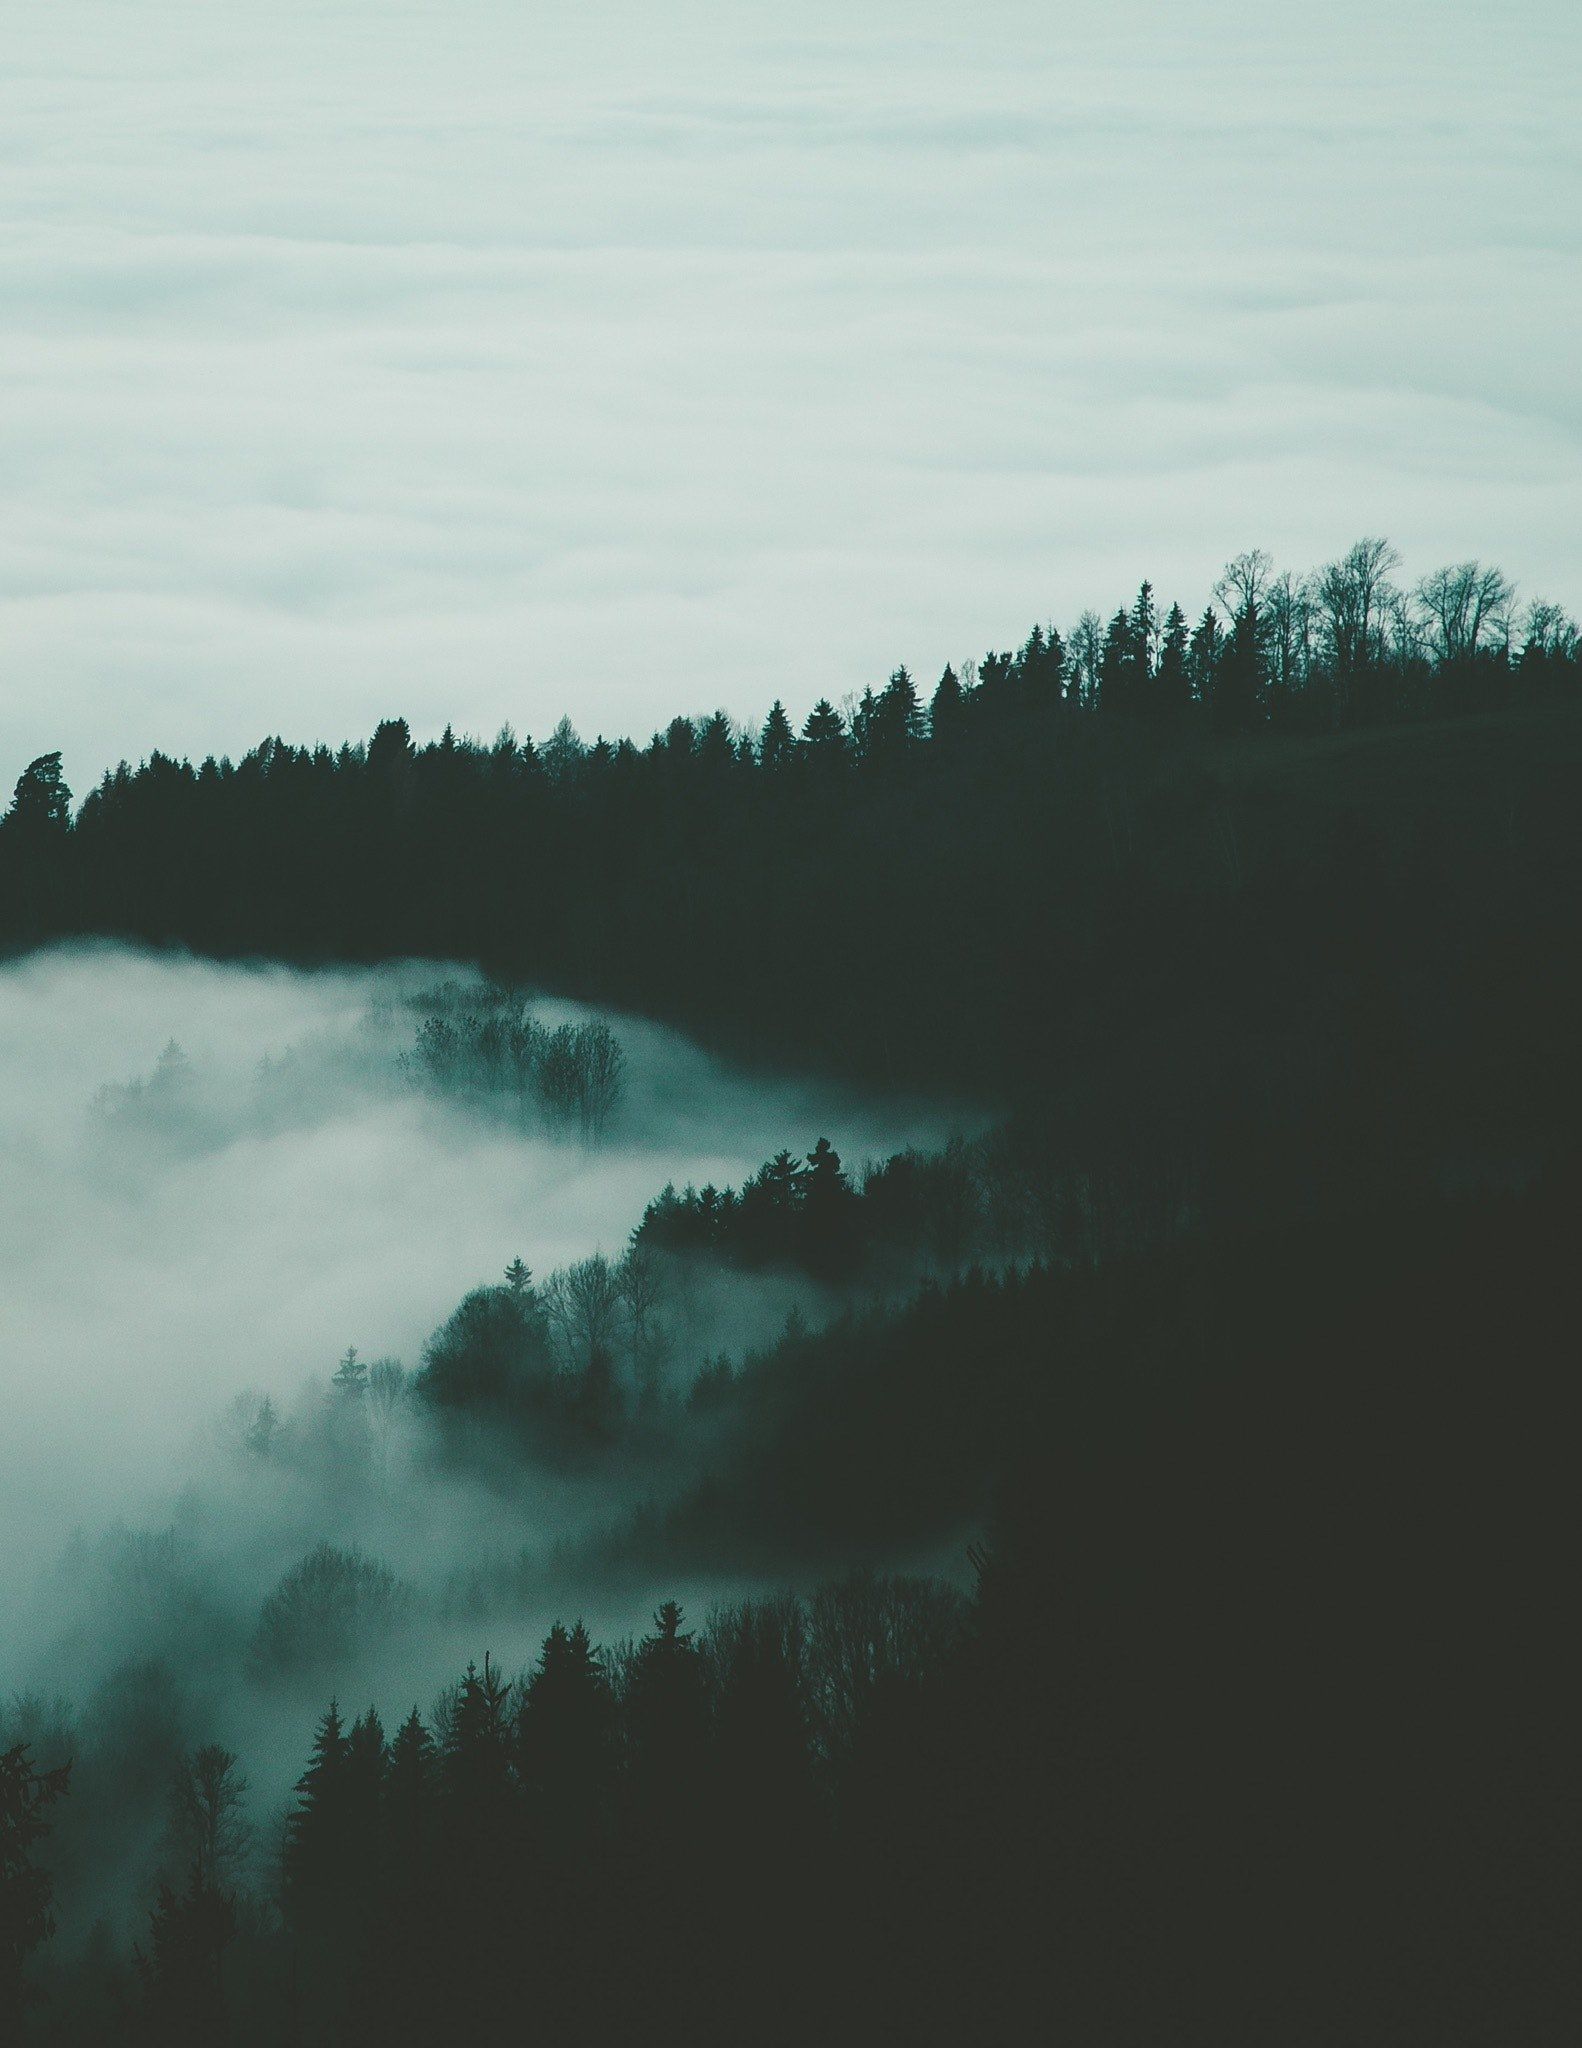 Wallpaper / dark silhouettes of trees under a cloudy sky, forest in clouds and fog 4k wallpaper free download